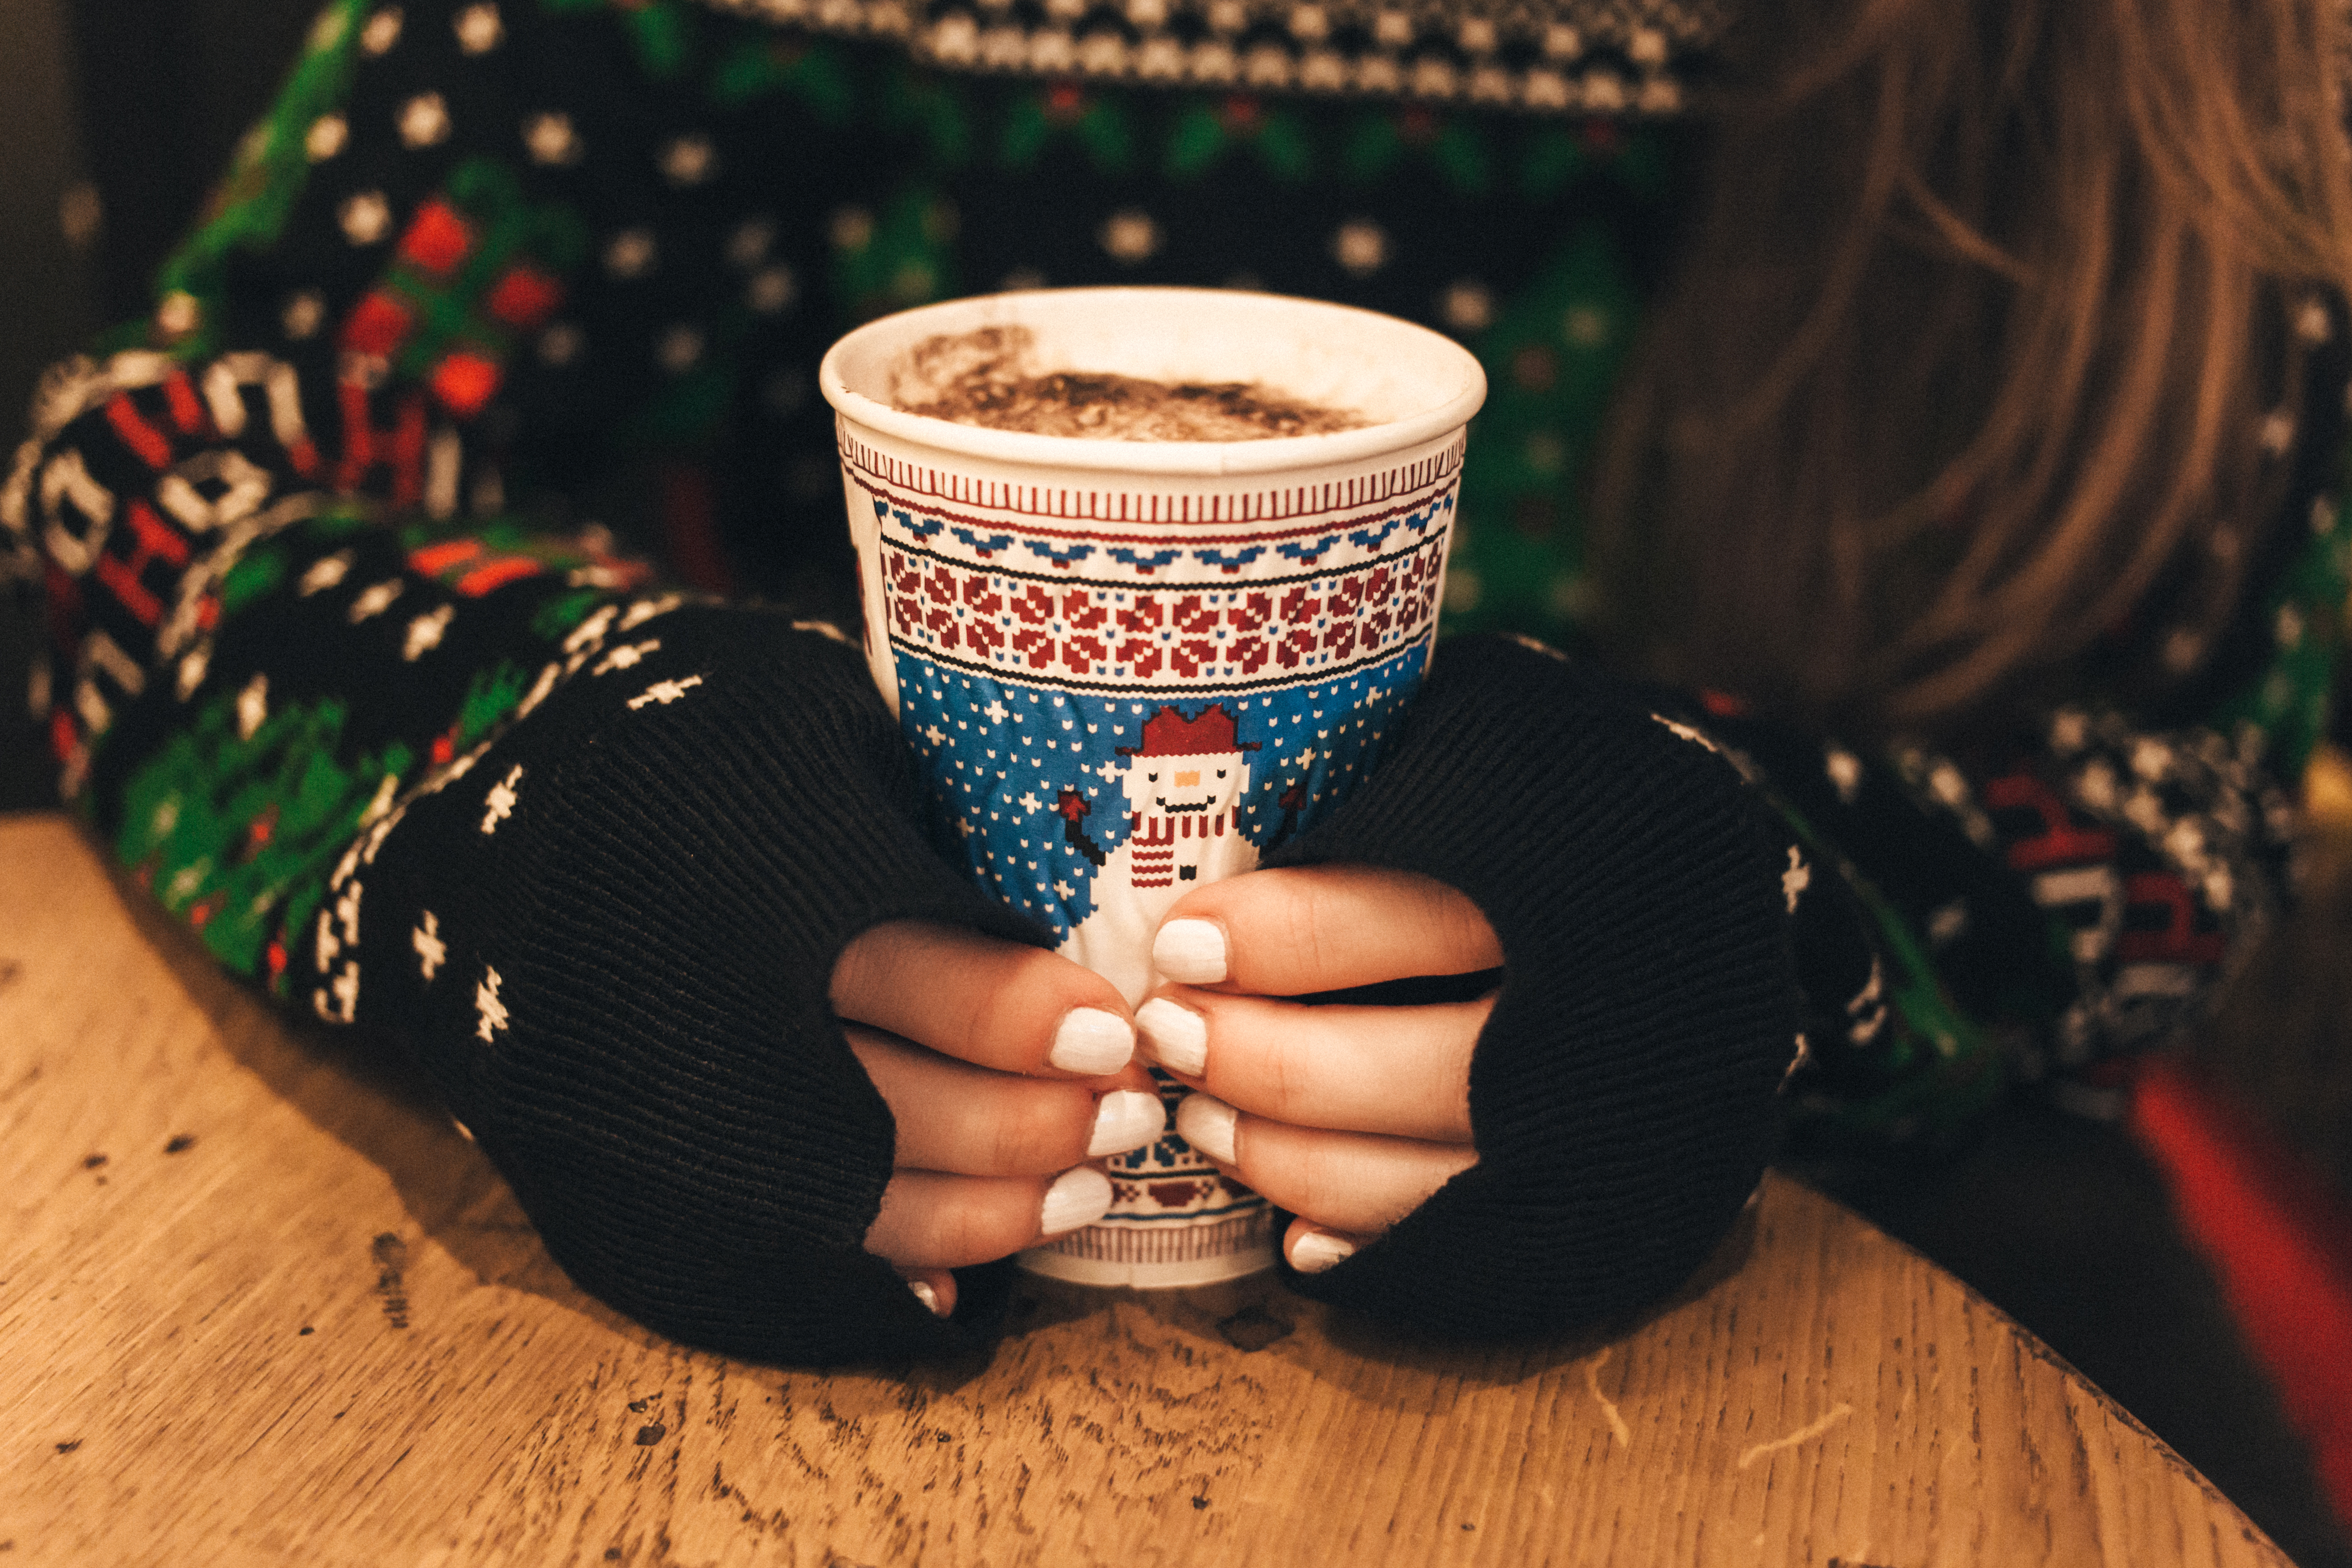 Windows Backgrounds coffee, food, christmas, hands, sweater